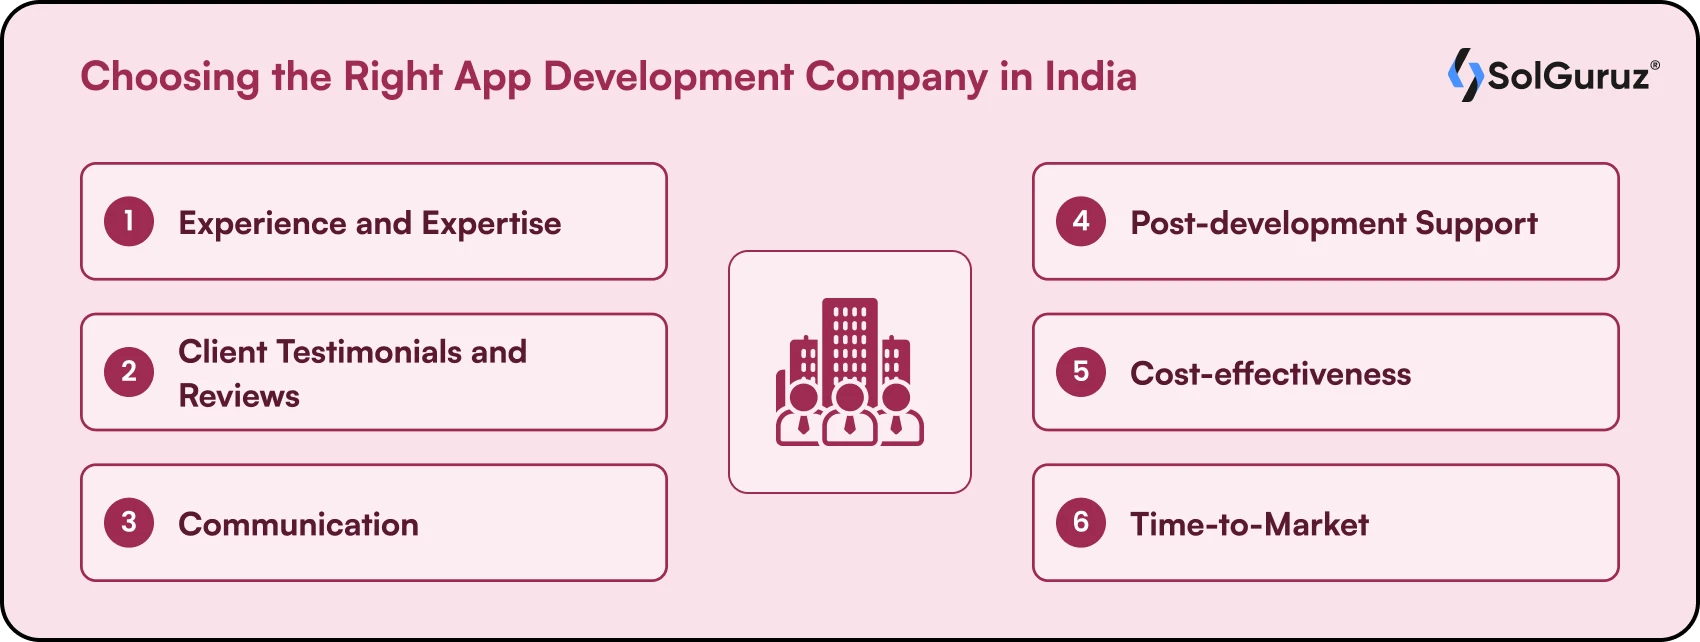 Choosing the Right App Development Company in India